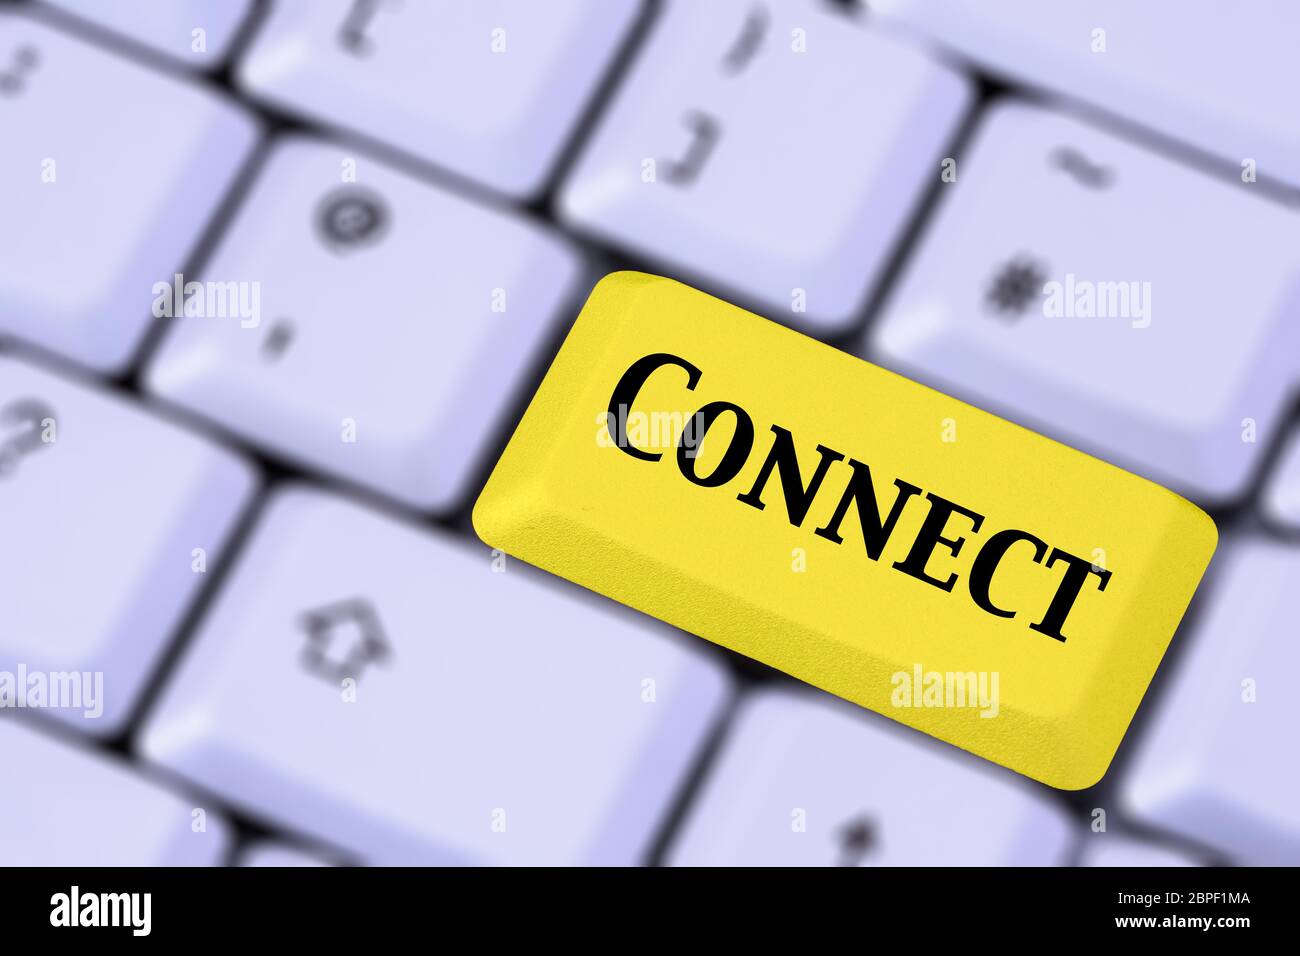 A keyboard with the word CONNECT on a yellow enter key. Make connections and stay connected concept. Stock Photo